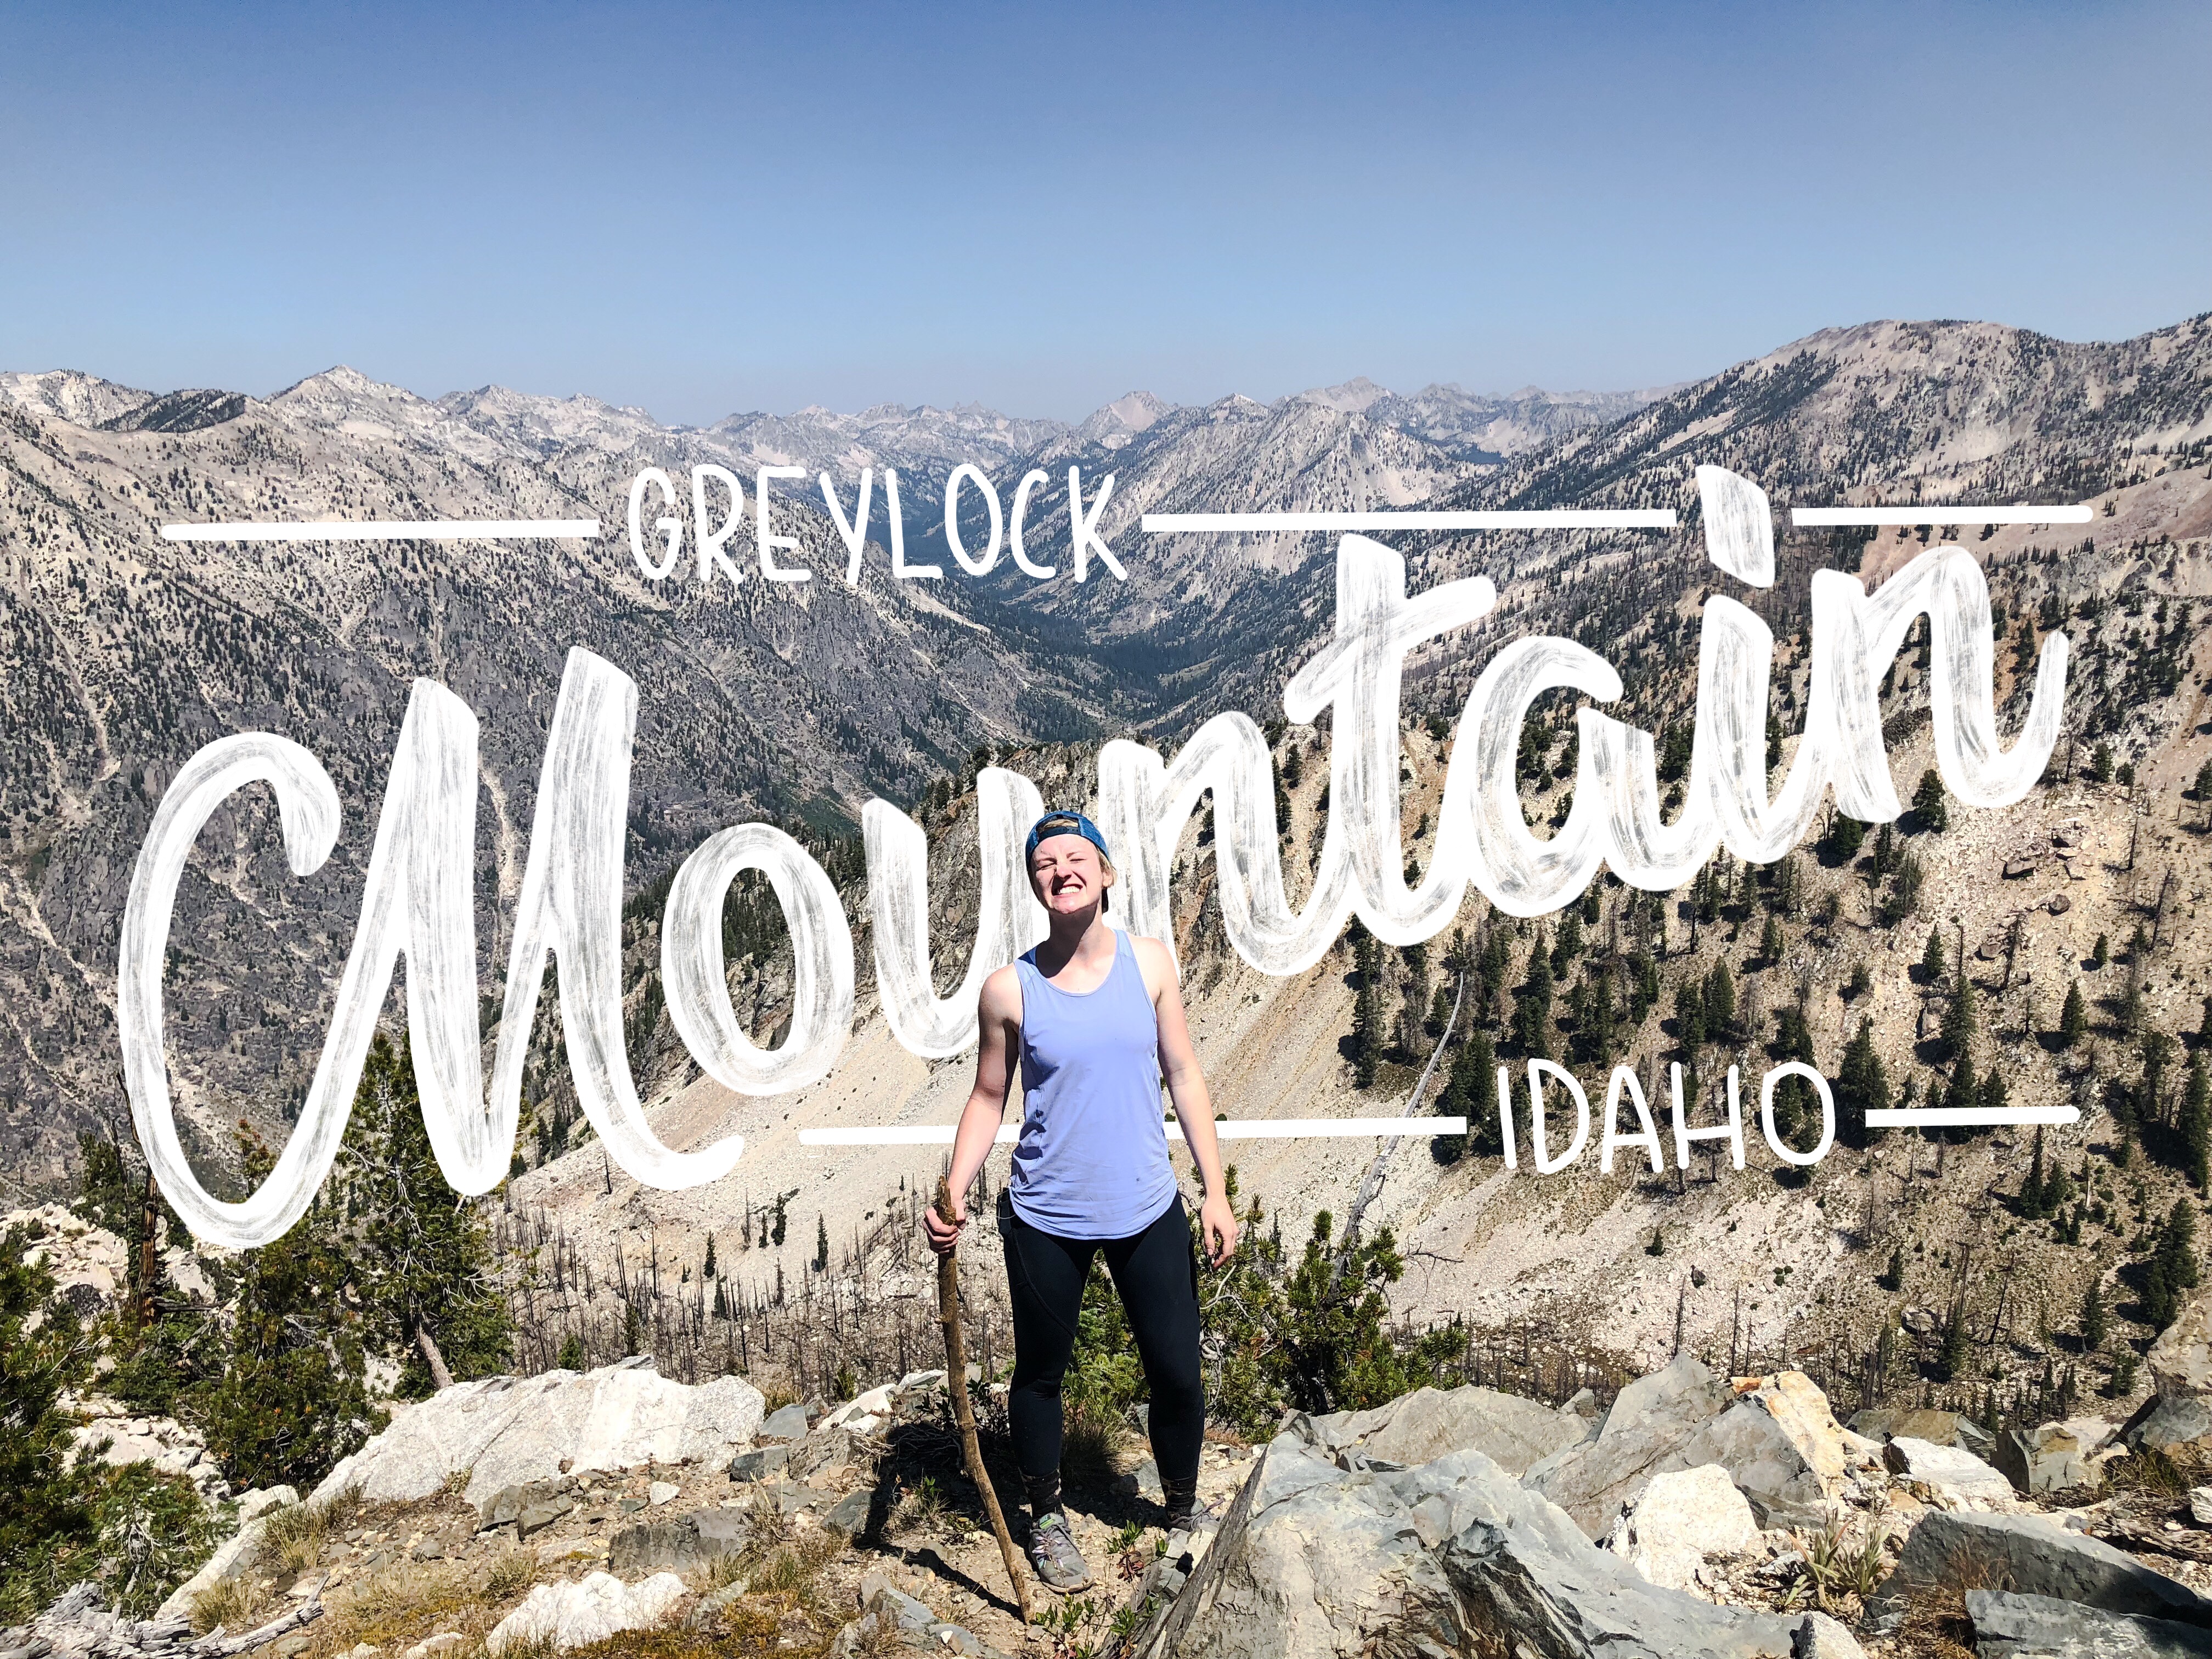 Typography over picture of hiking to a peak digital illustration